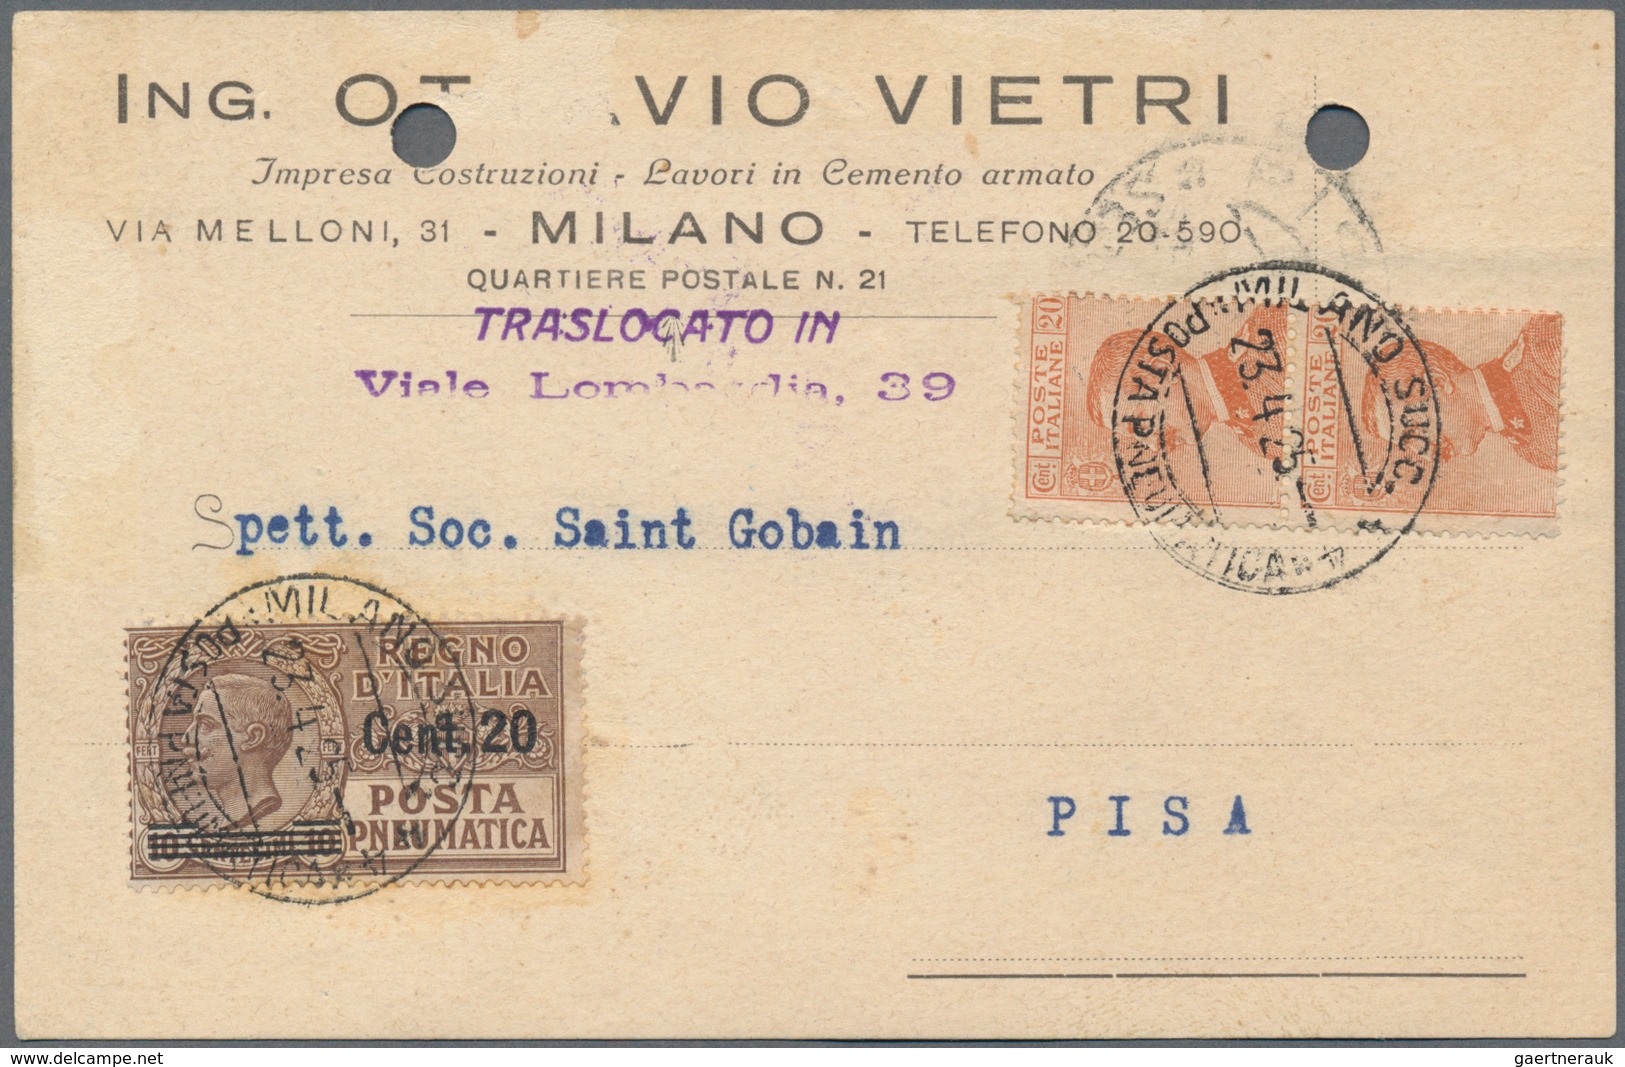 Italien: 1914 - 1957 (ca): "Pneumatic Mail" in Rome, Naples and Milan. 130+ covers, stationery, tele